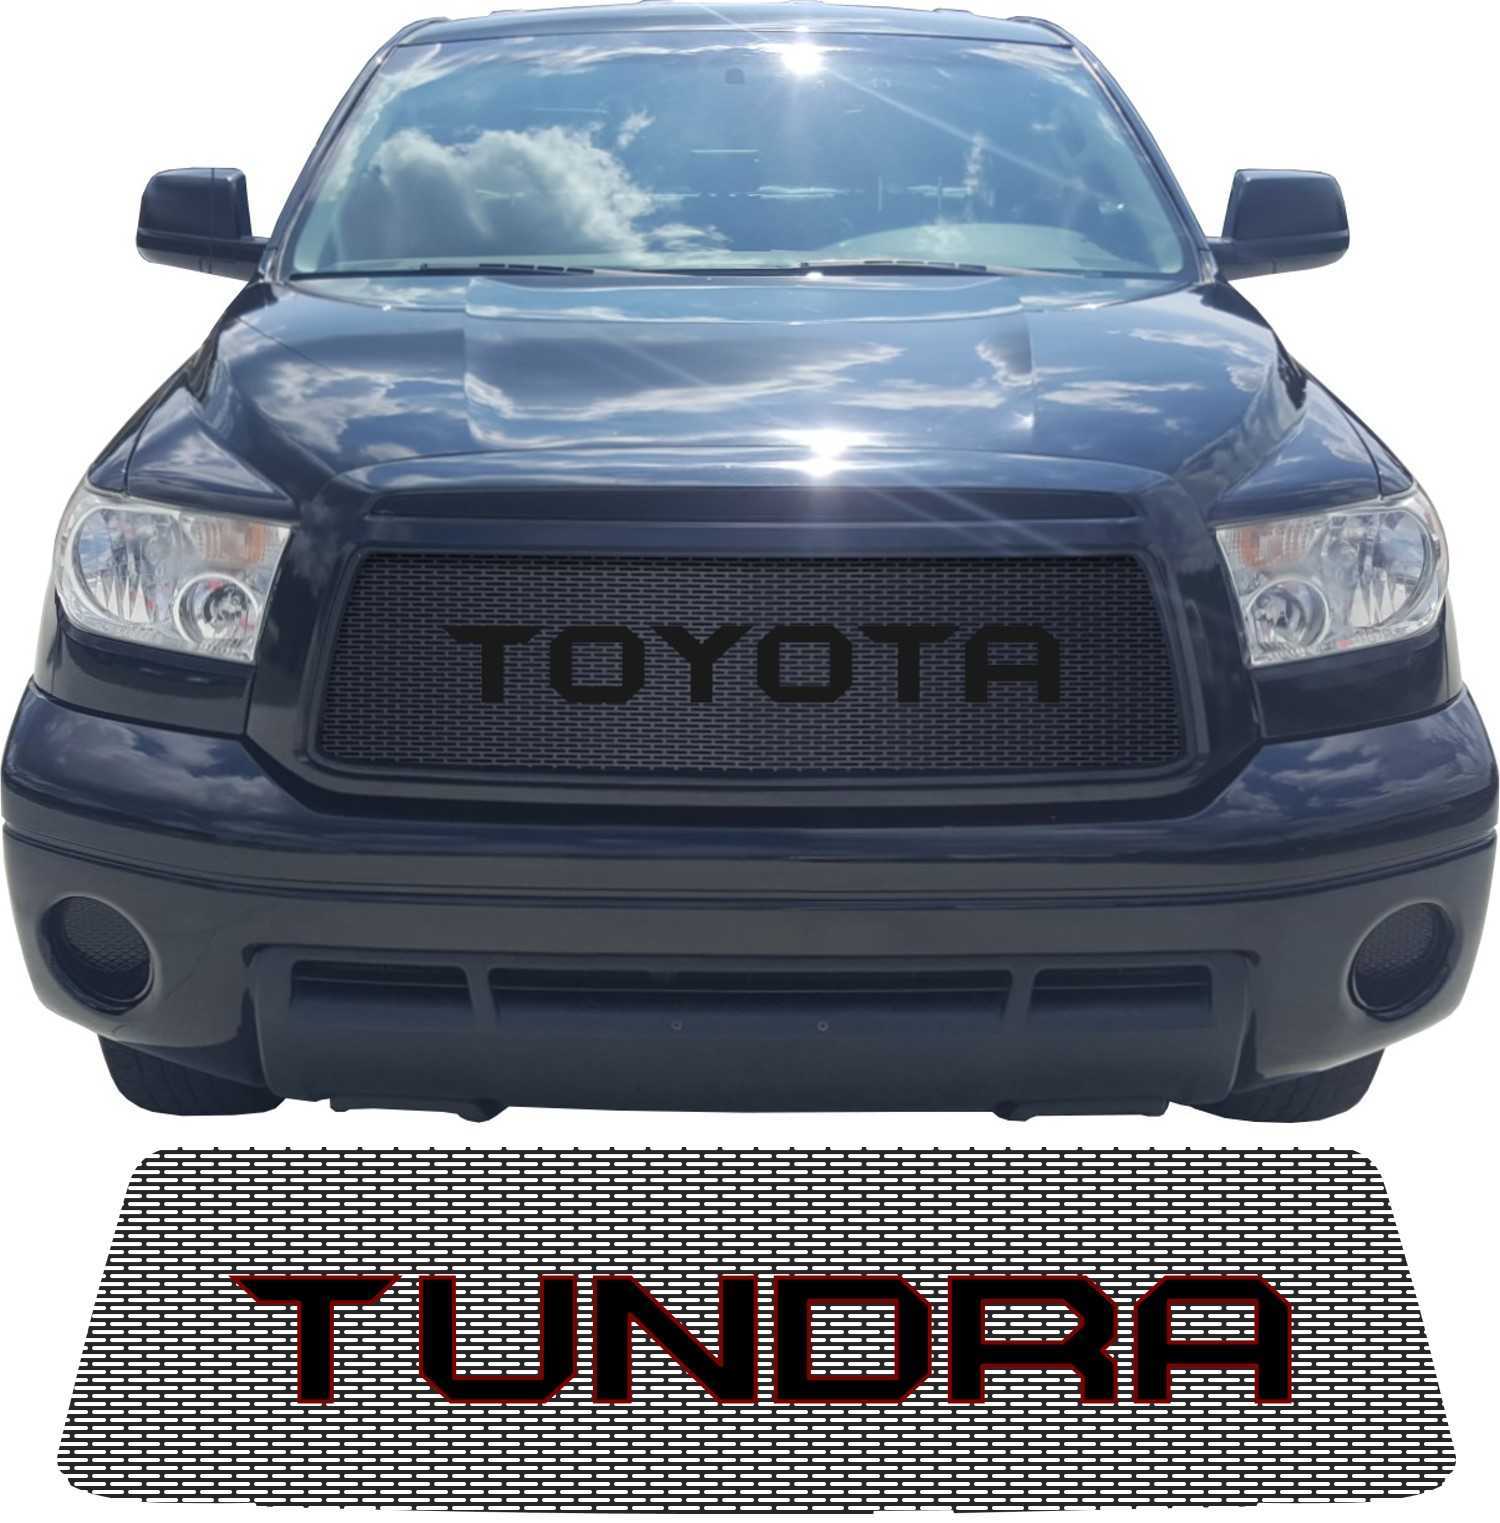 2010 - 2013 Toyota Tundra Grill Mesh with Big Letters